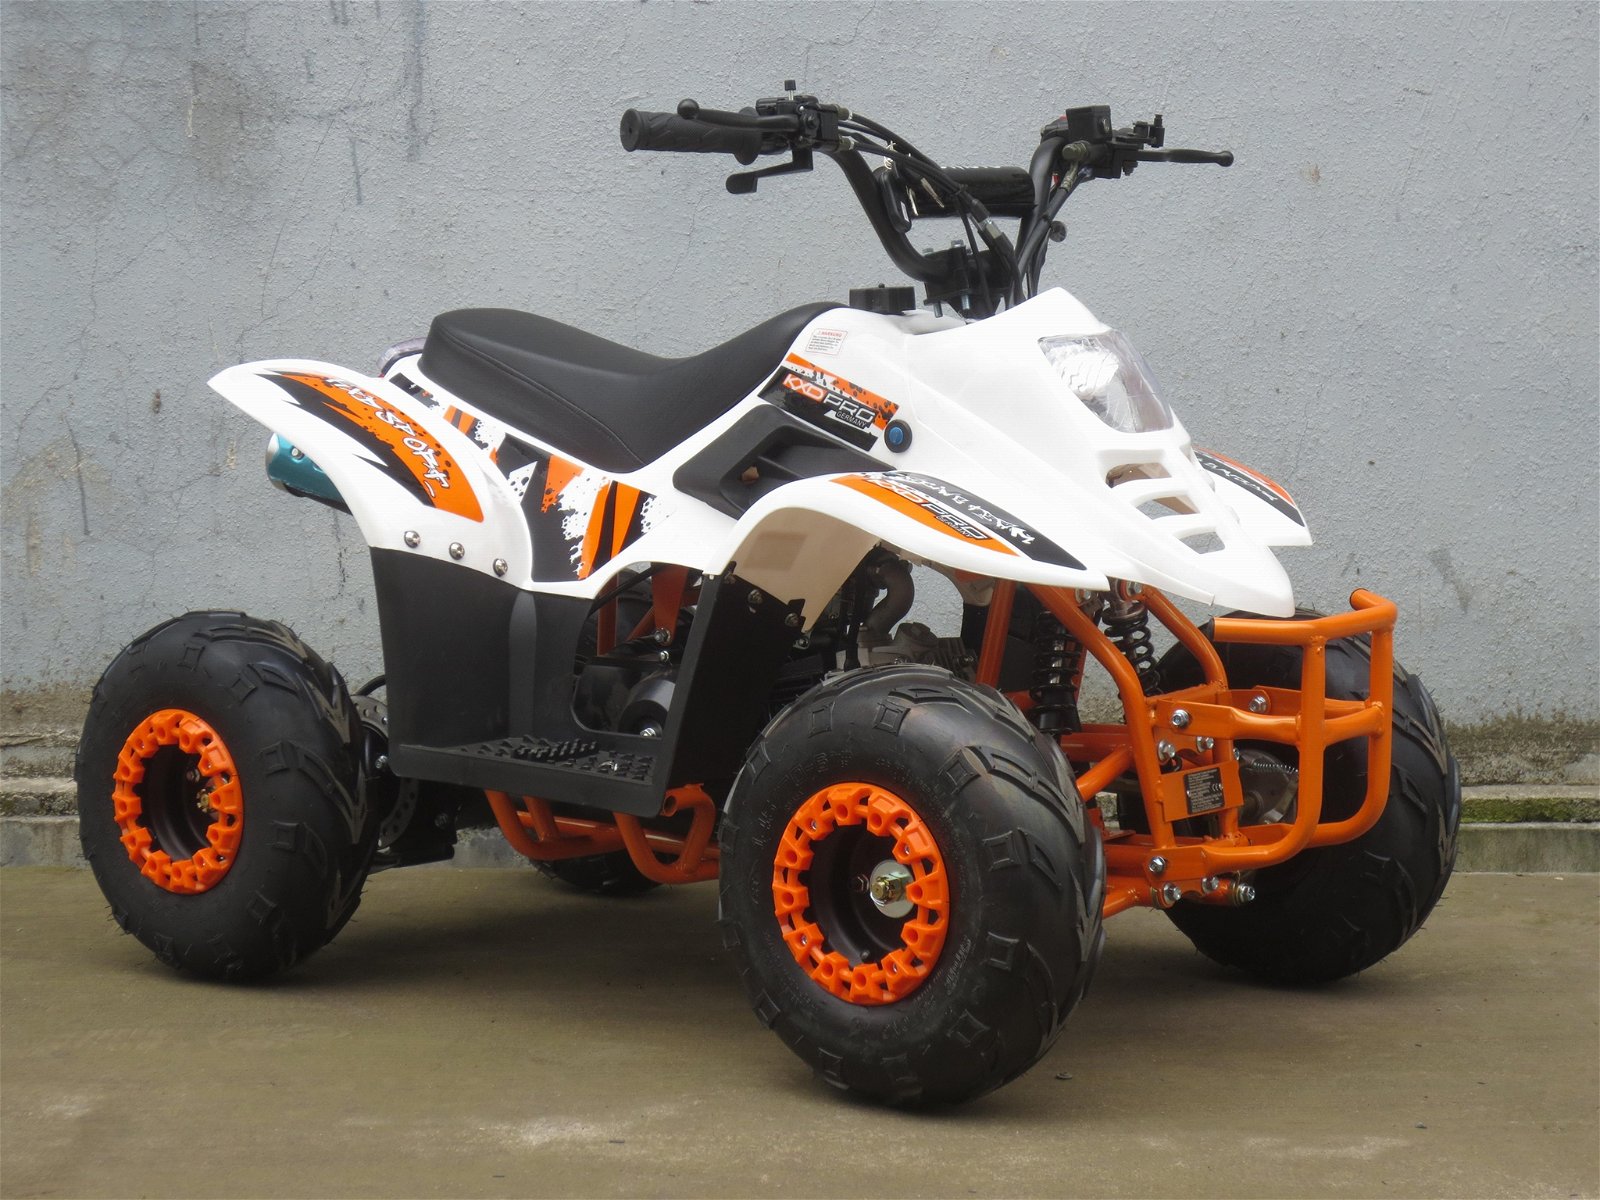 KXD ATV-001  ATV Quads Factory from China for kids 3